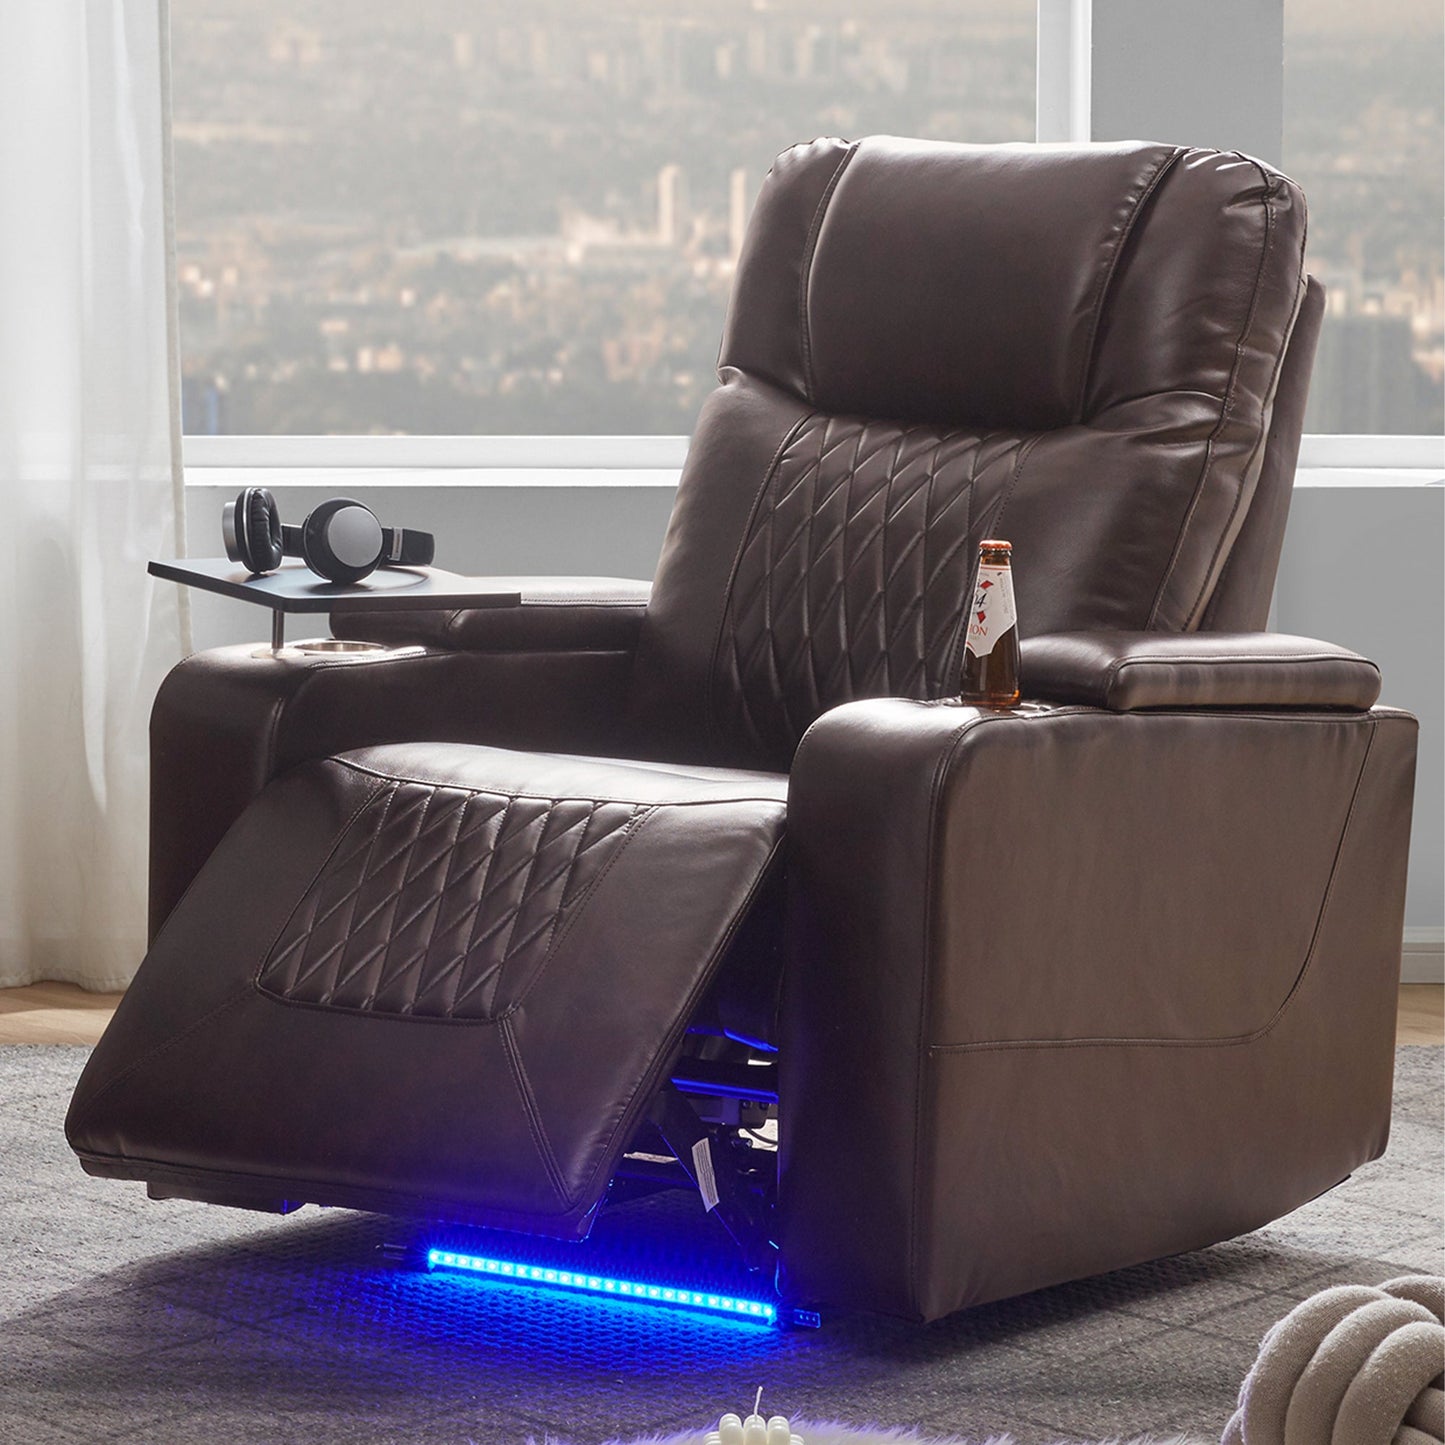 Power Motion Recliner with USB Charging Port and Hidden Arm Storage 2 Convenient Cup Holders Design and 360° Swivel Tray Table, Brown